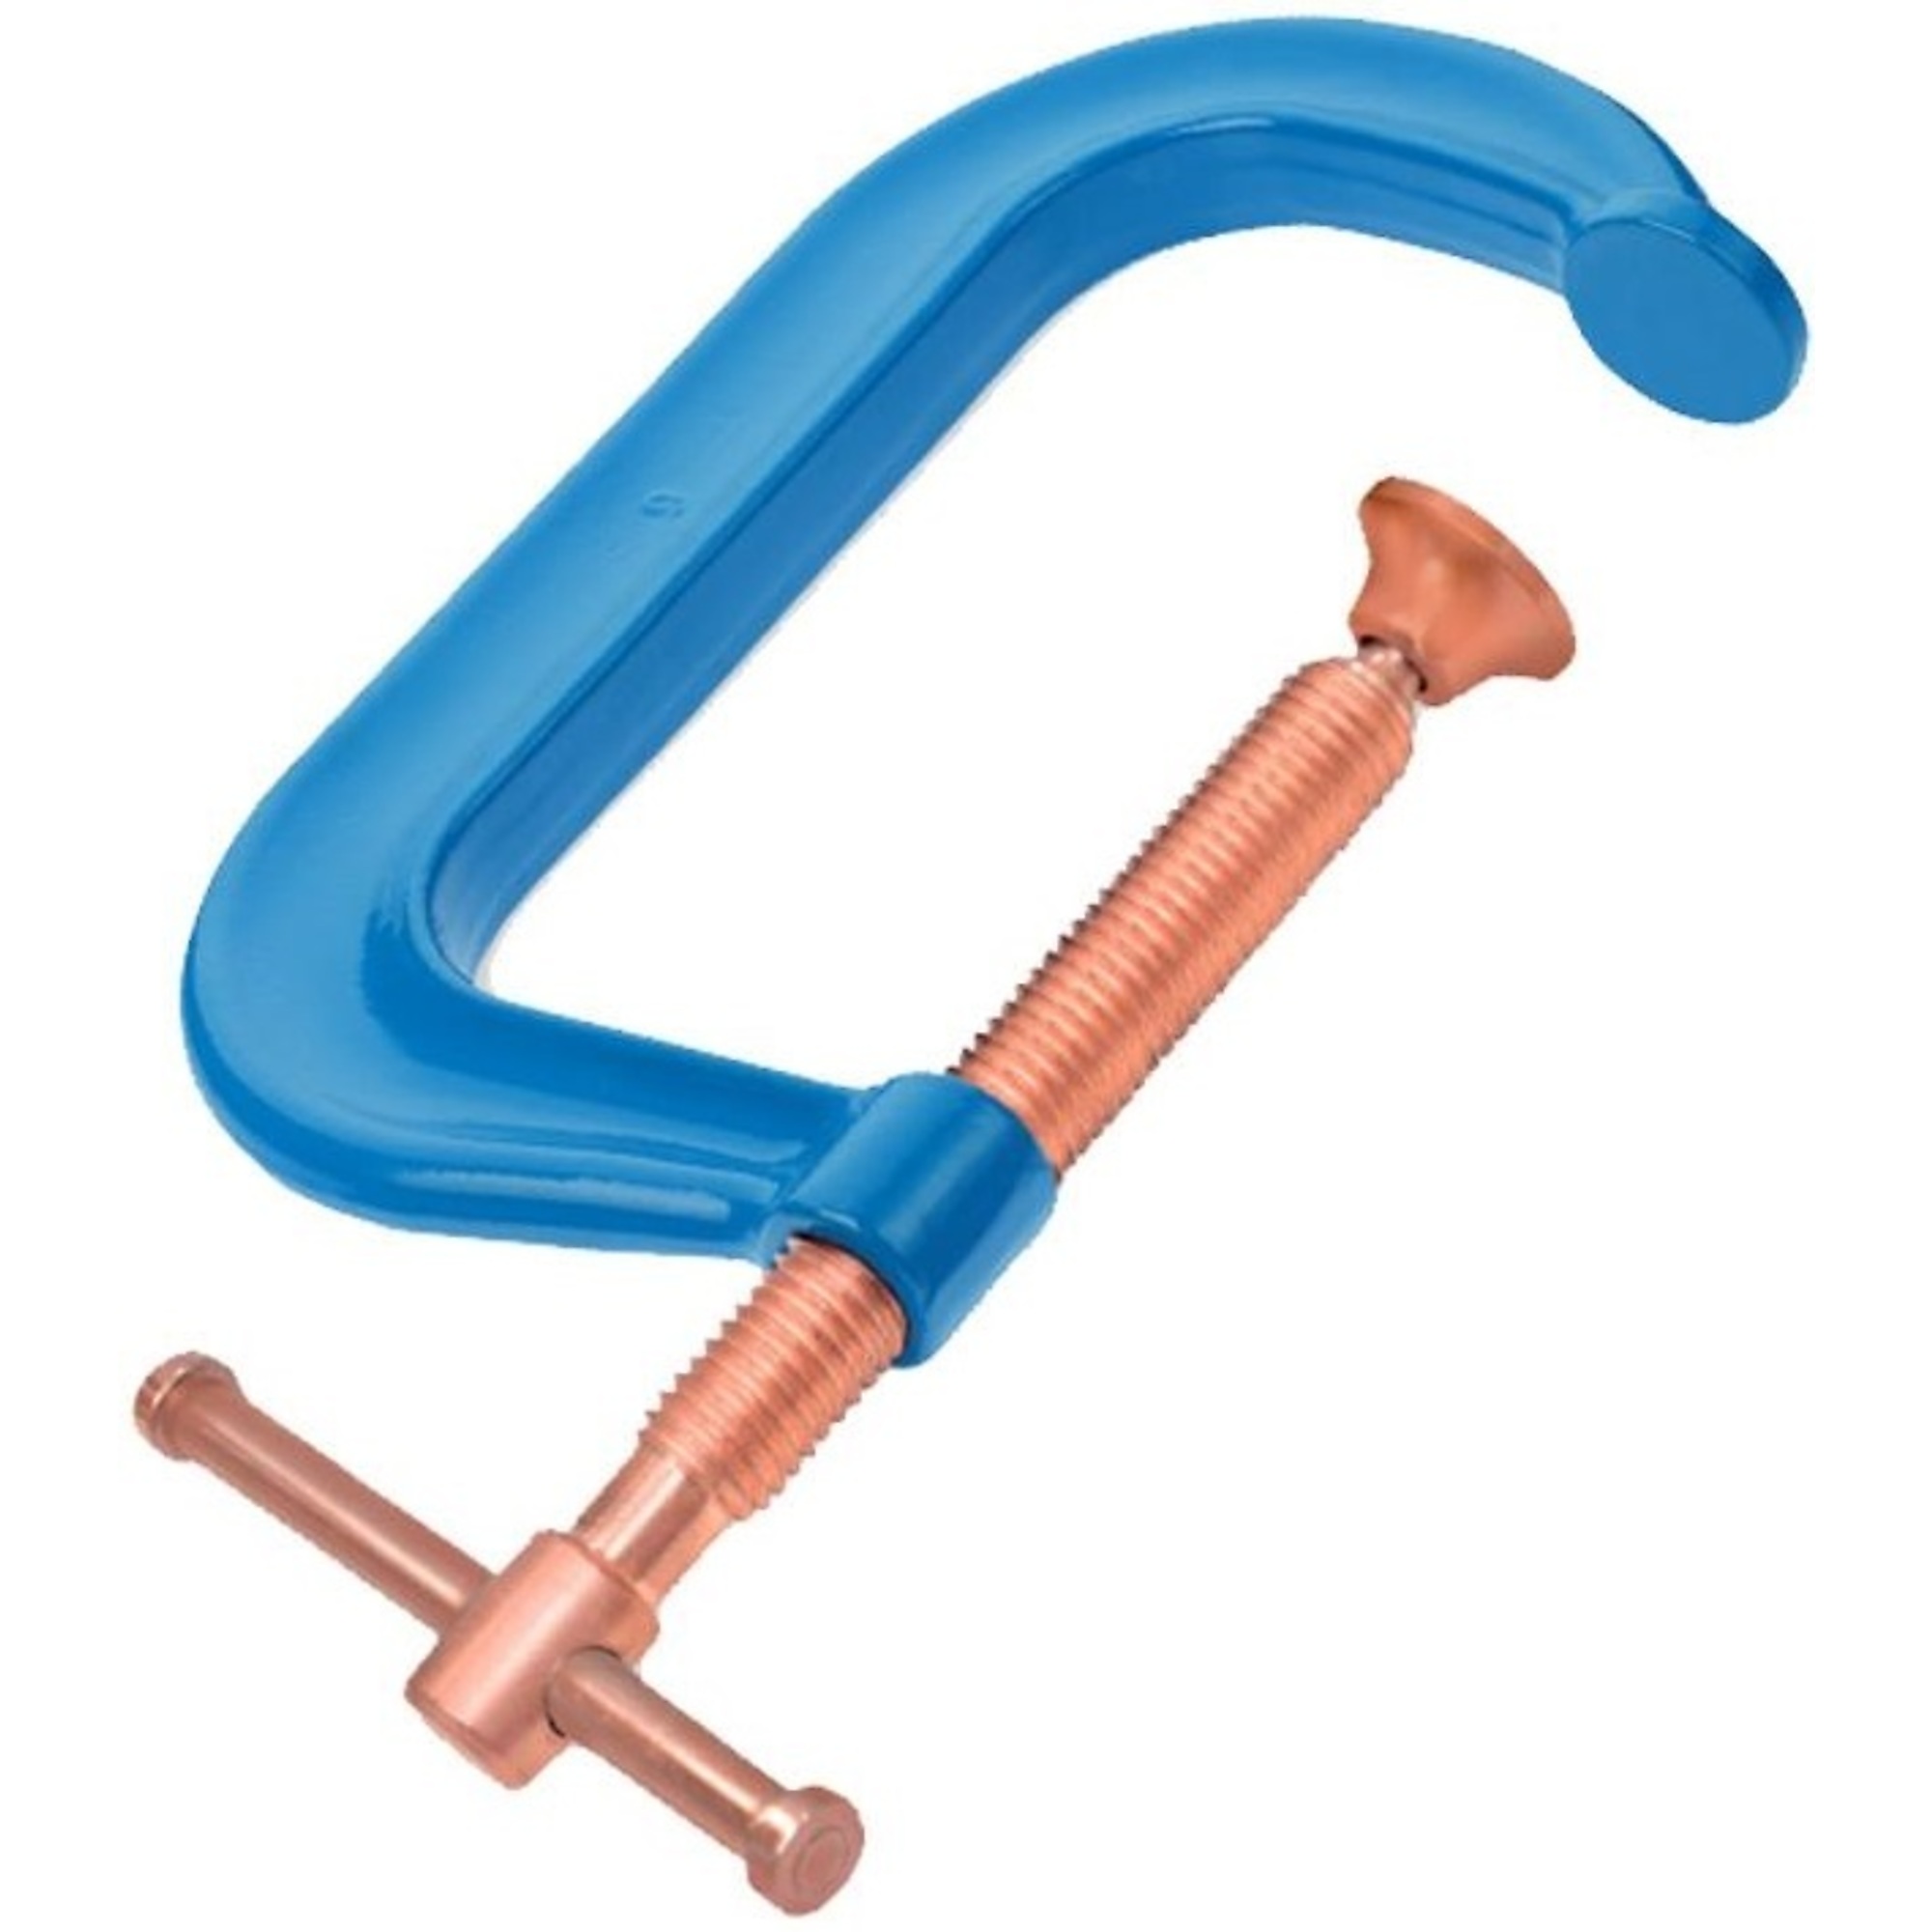 KANCA, FORGED C CLAMP W. COPPER COATED SCREW 200 MM - 8Inch, Clamp Pressure 6750 lb, Opening Size 8 in, Pieces (qty.) 1 Model Forged C Clamp w. Copper